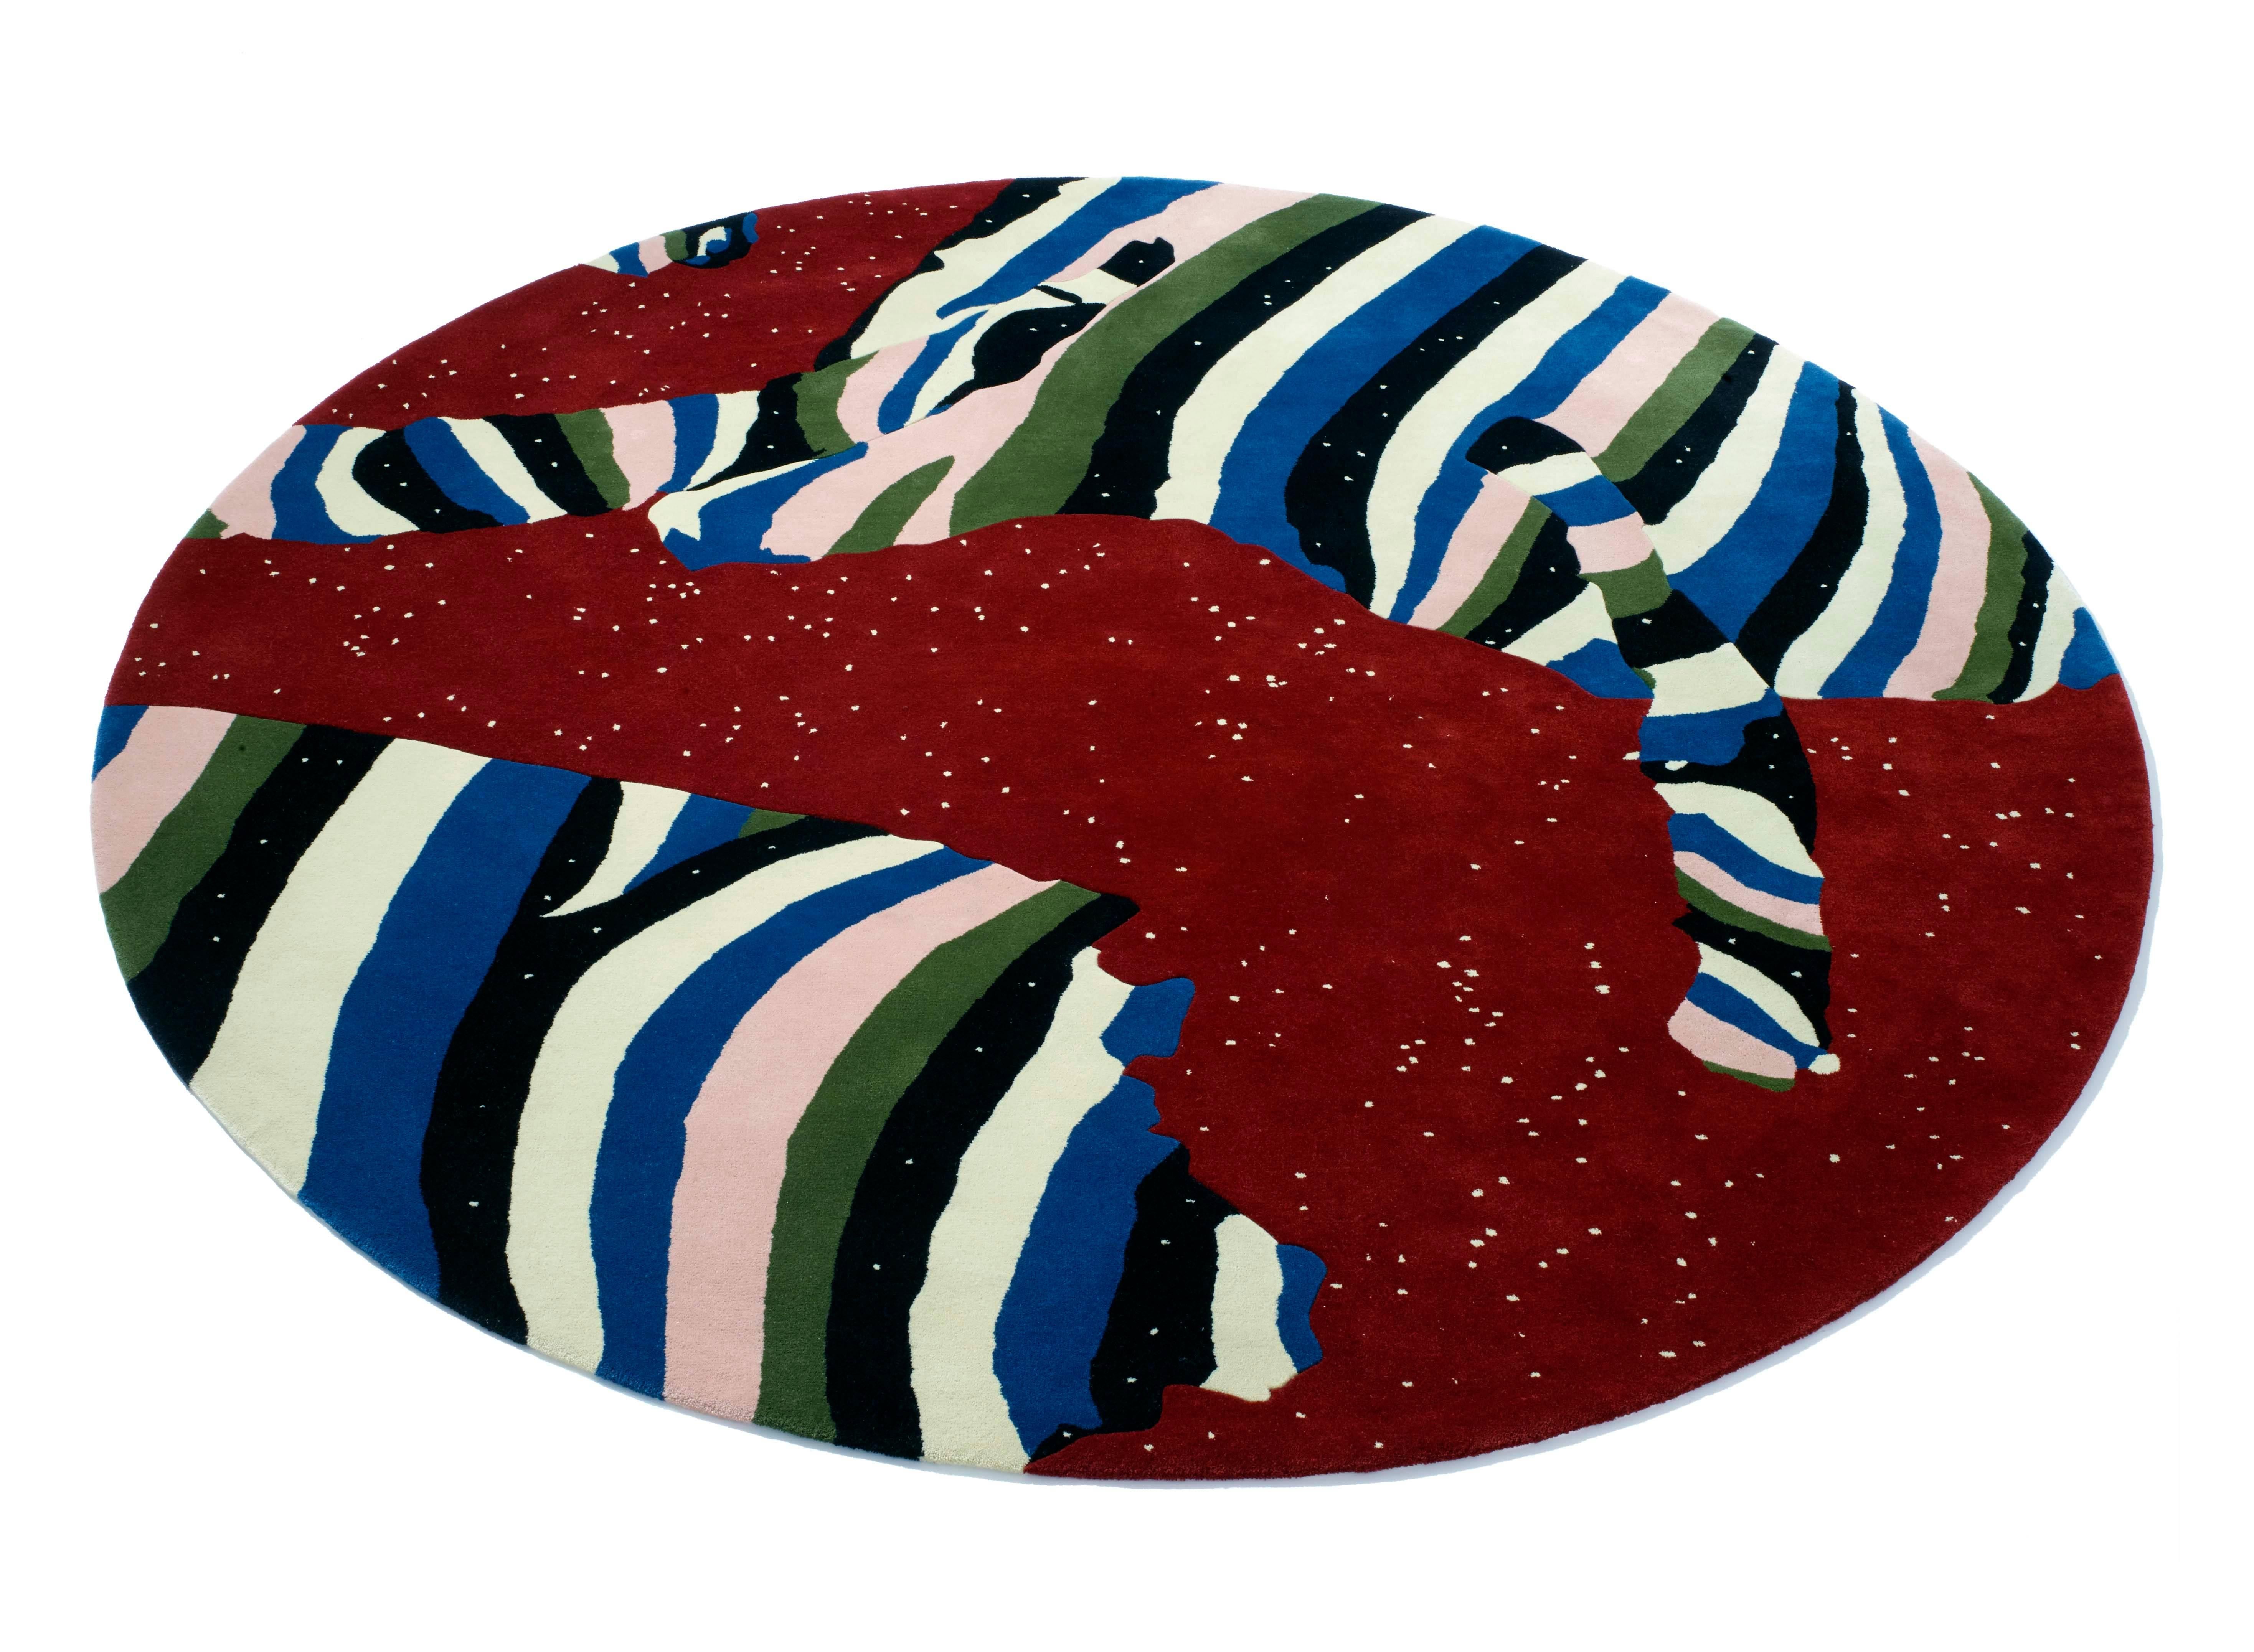 Cosmos round rug by Cody Hoyt + kinder MODERN in 100% New Zealand wool

Designed by Cody Hoyt and Lora Appleton
96 in diameter
100% New Zealand wool
Hand tufted and hand-cut

kinder modern launches the first in the kM artist rug collection with our